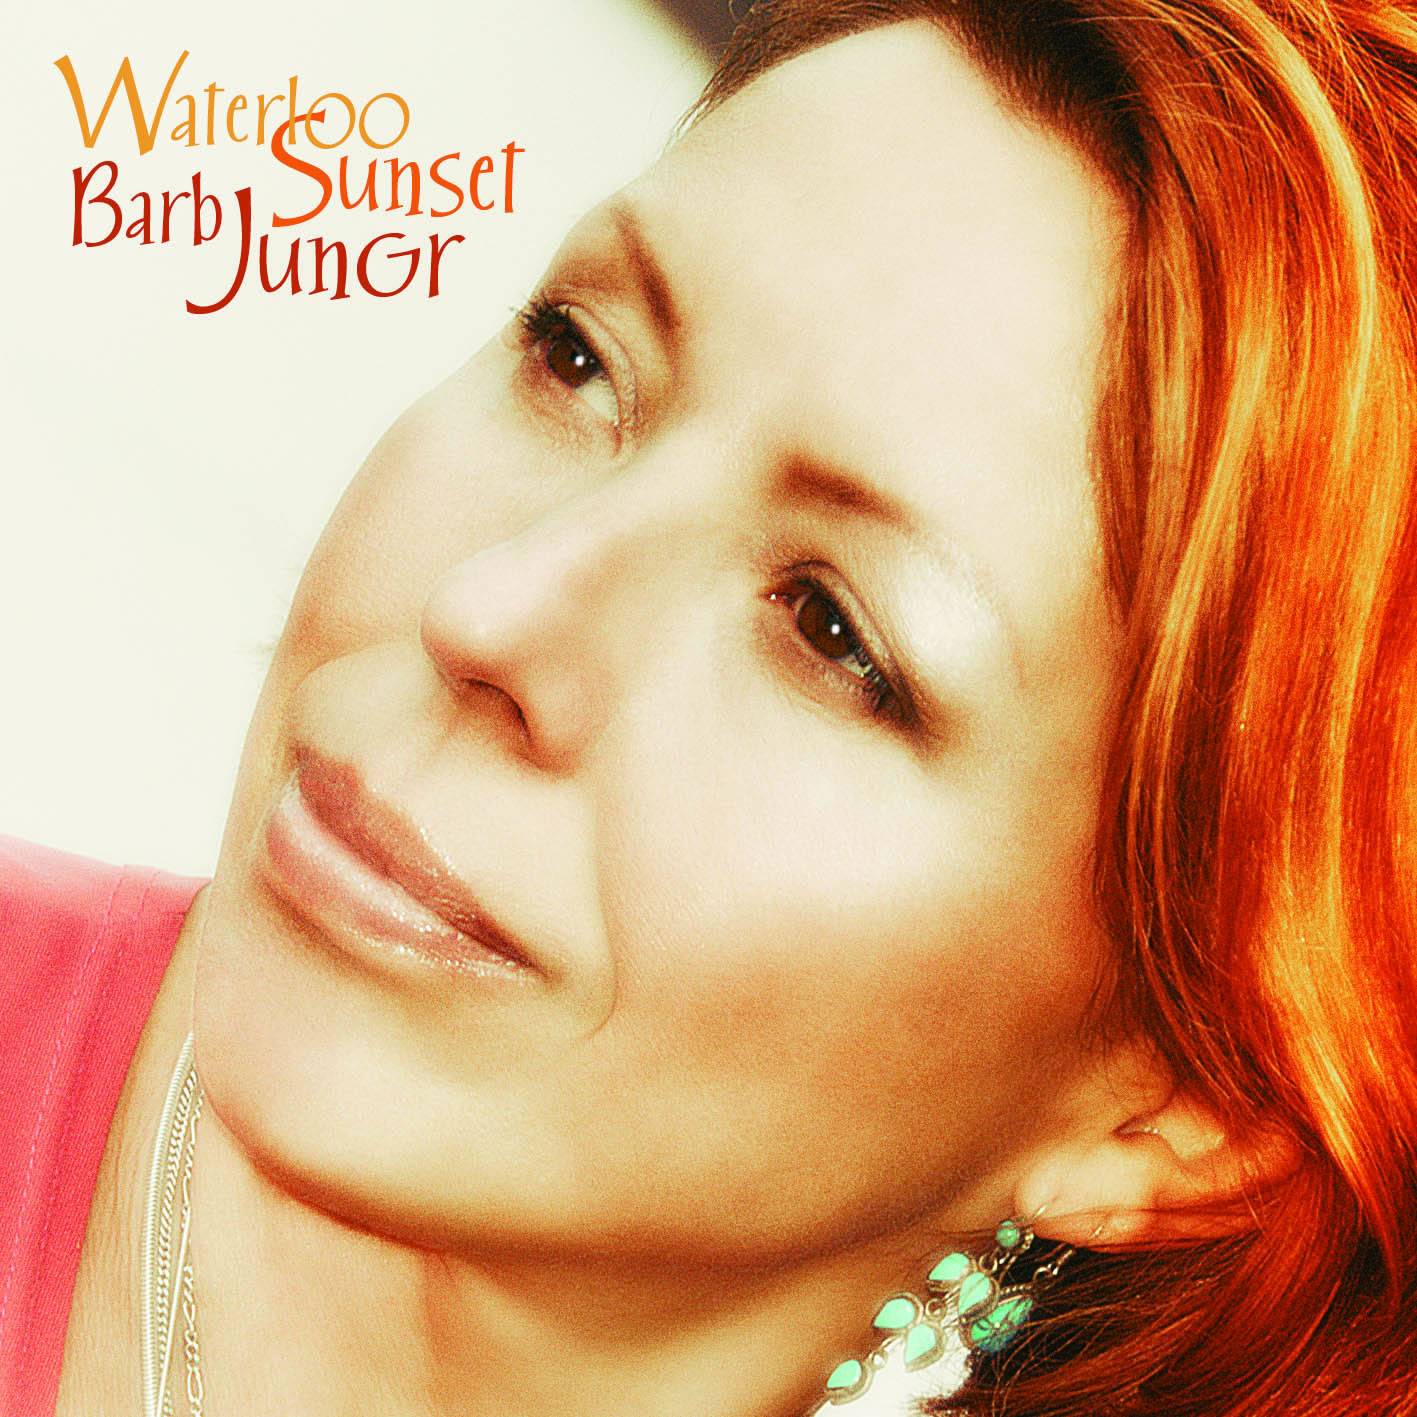 Barb Jungr - Waterloo Sunset (2003) [Reissue 2005] MCH SACD ISO + DSF DSD64 + FLAC 24bit/48kHz